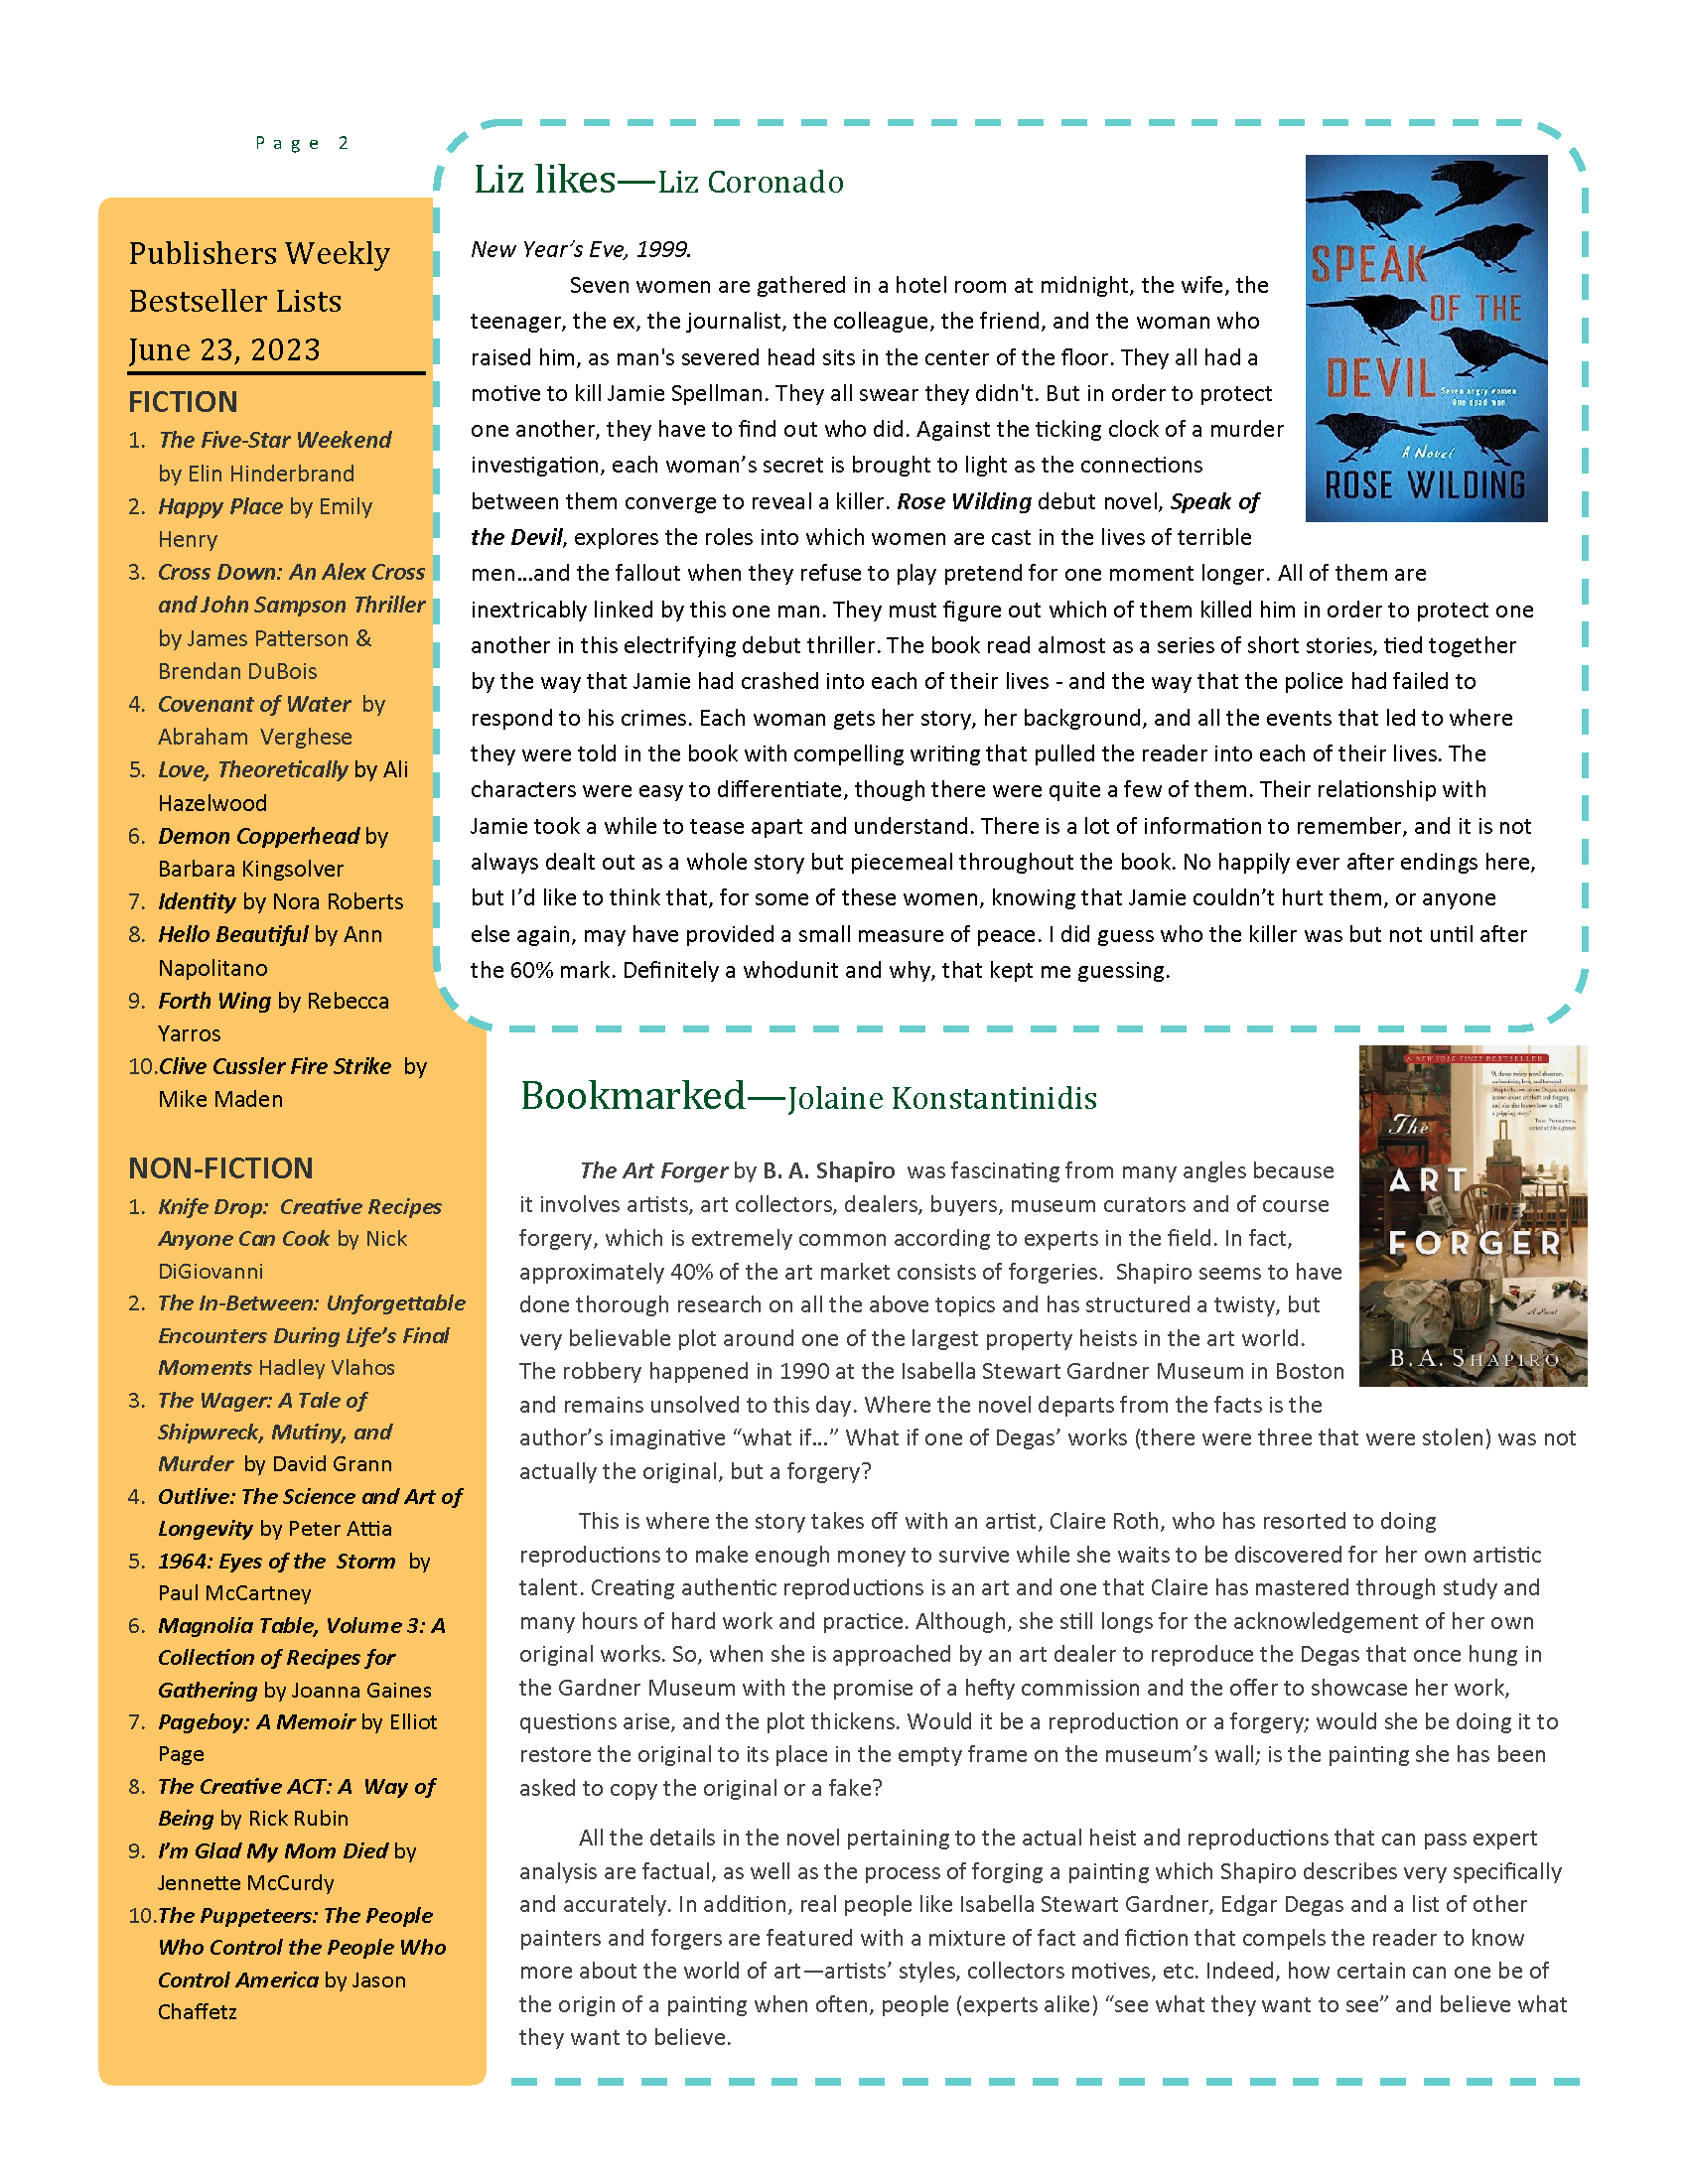 This is page 2 of the newsletter. A more accessible version is available in PDF format using the link at the top of the page.